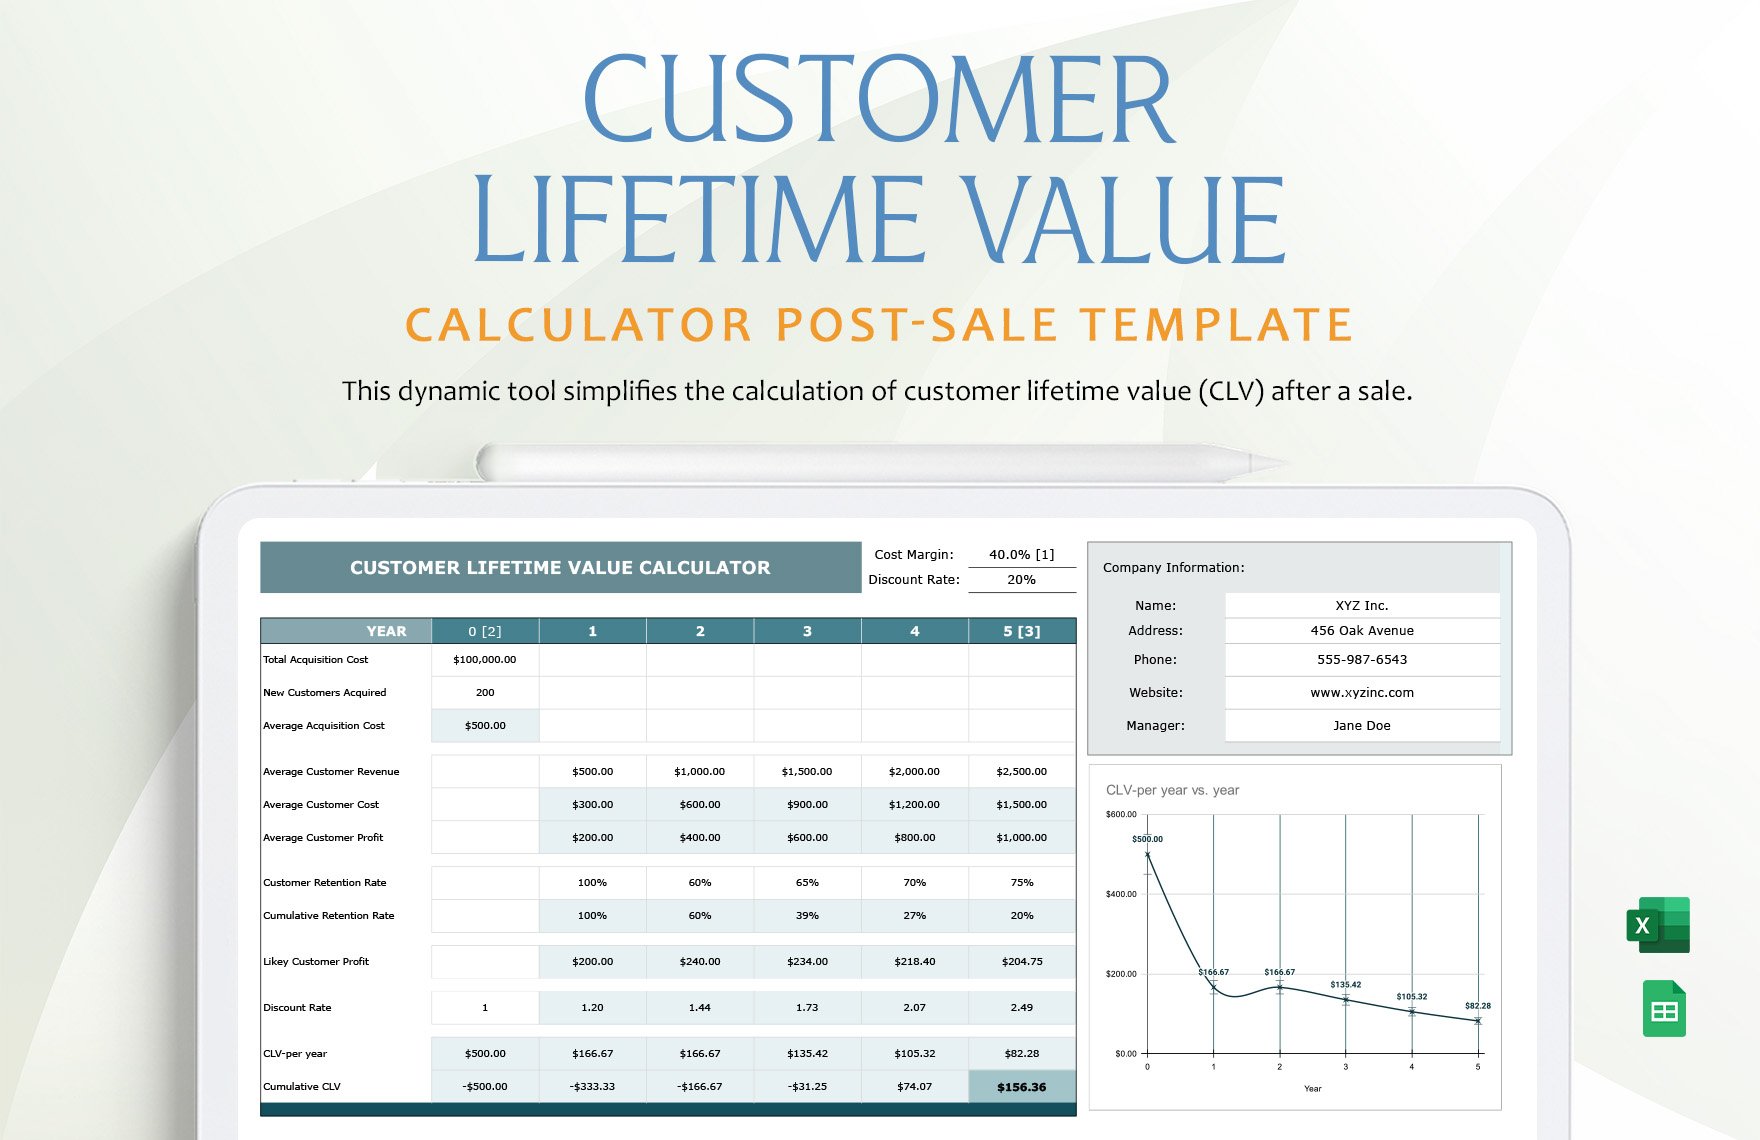 Customer Lifetime Value Calculator Post-Sale Template in Excel, Google Sheets